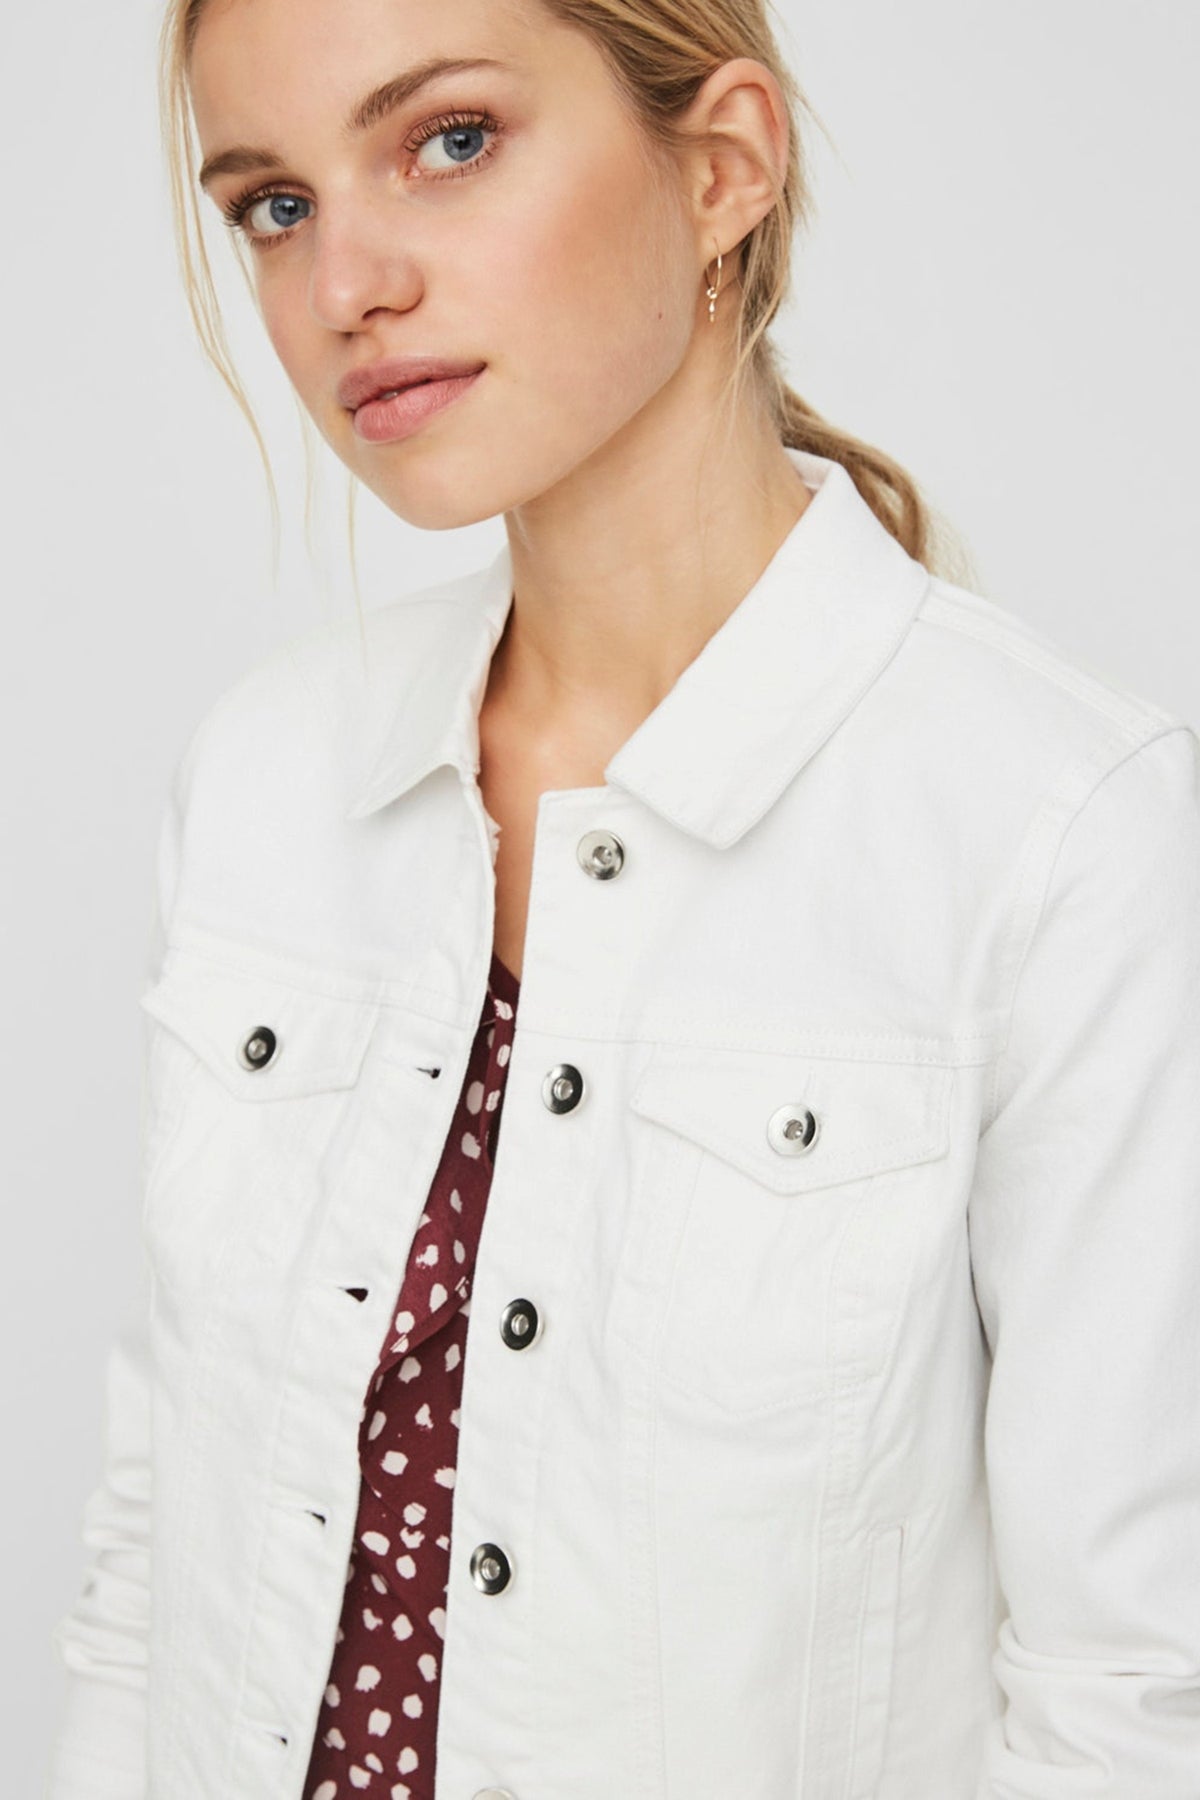 Fitted white denim jacket with button detailing, worn by a young woman with blonde hair against a plain background.